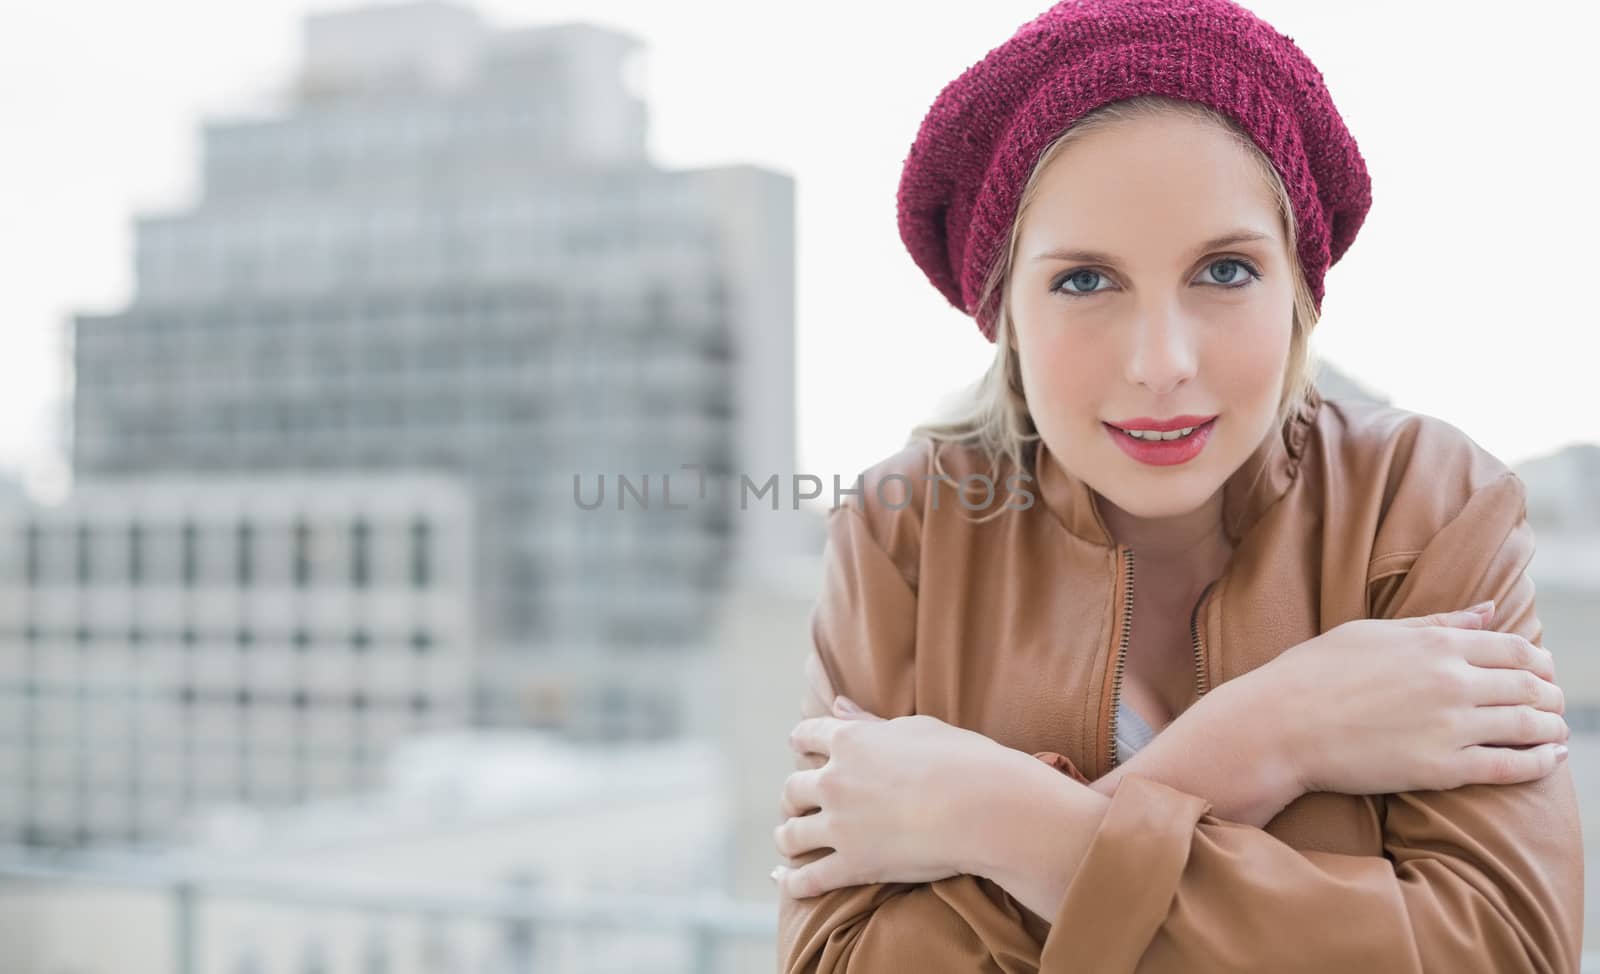 Cold casual blonde posing outdoors on urban background